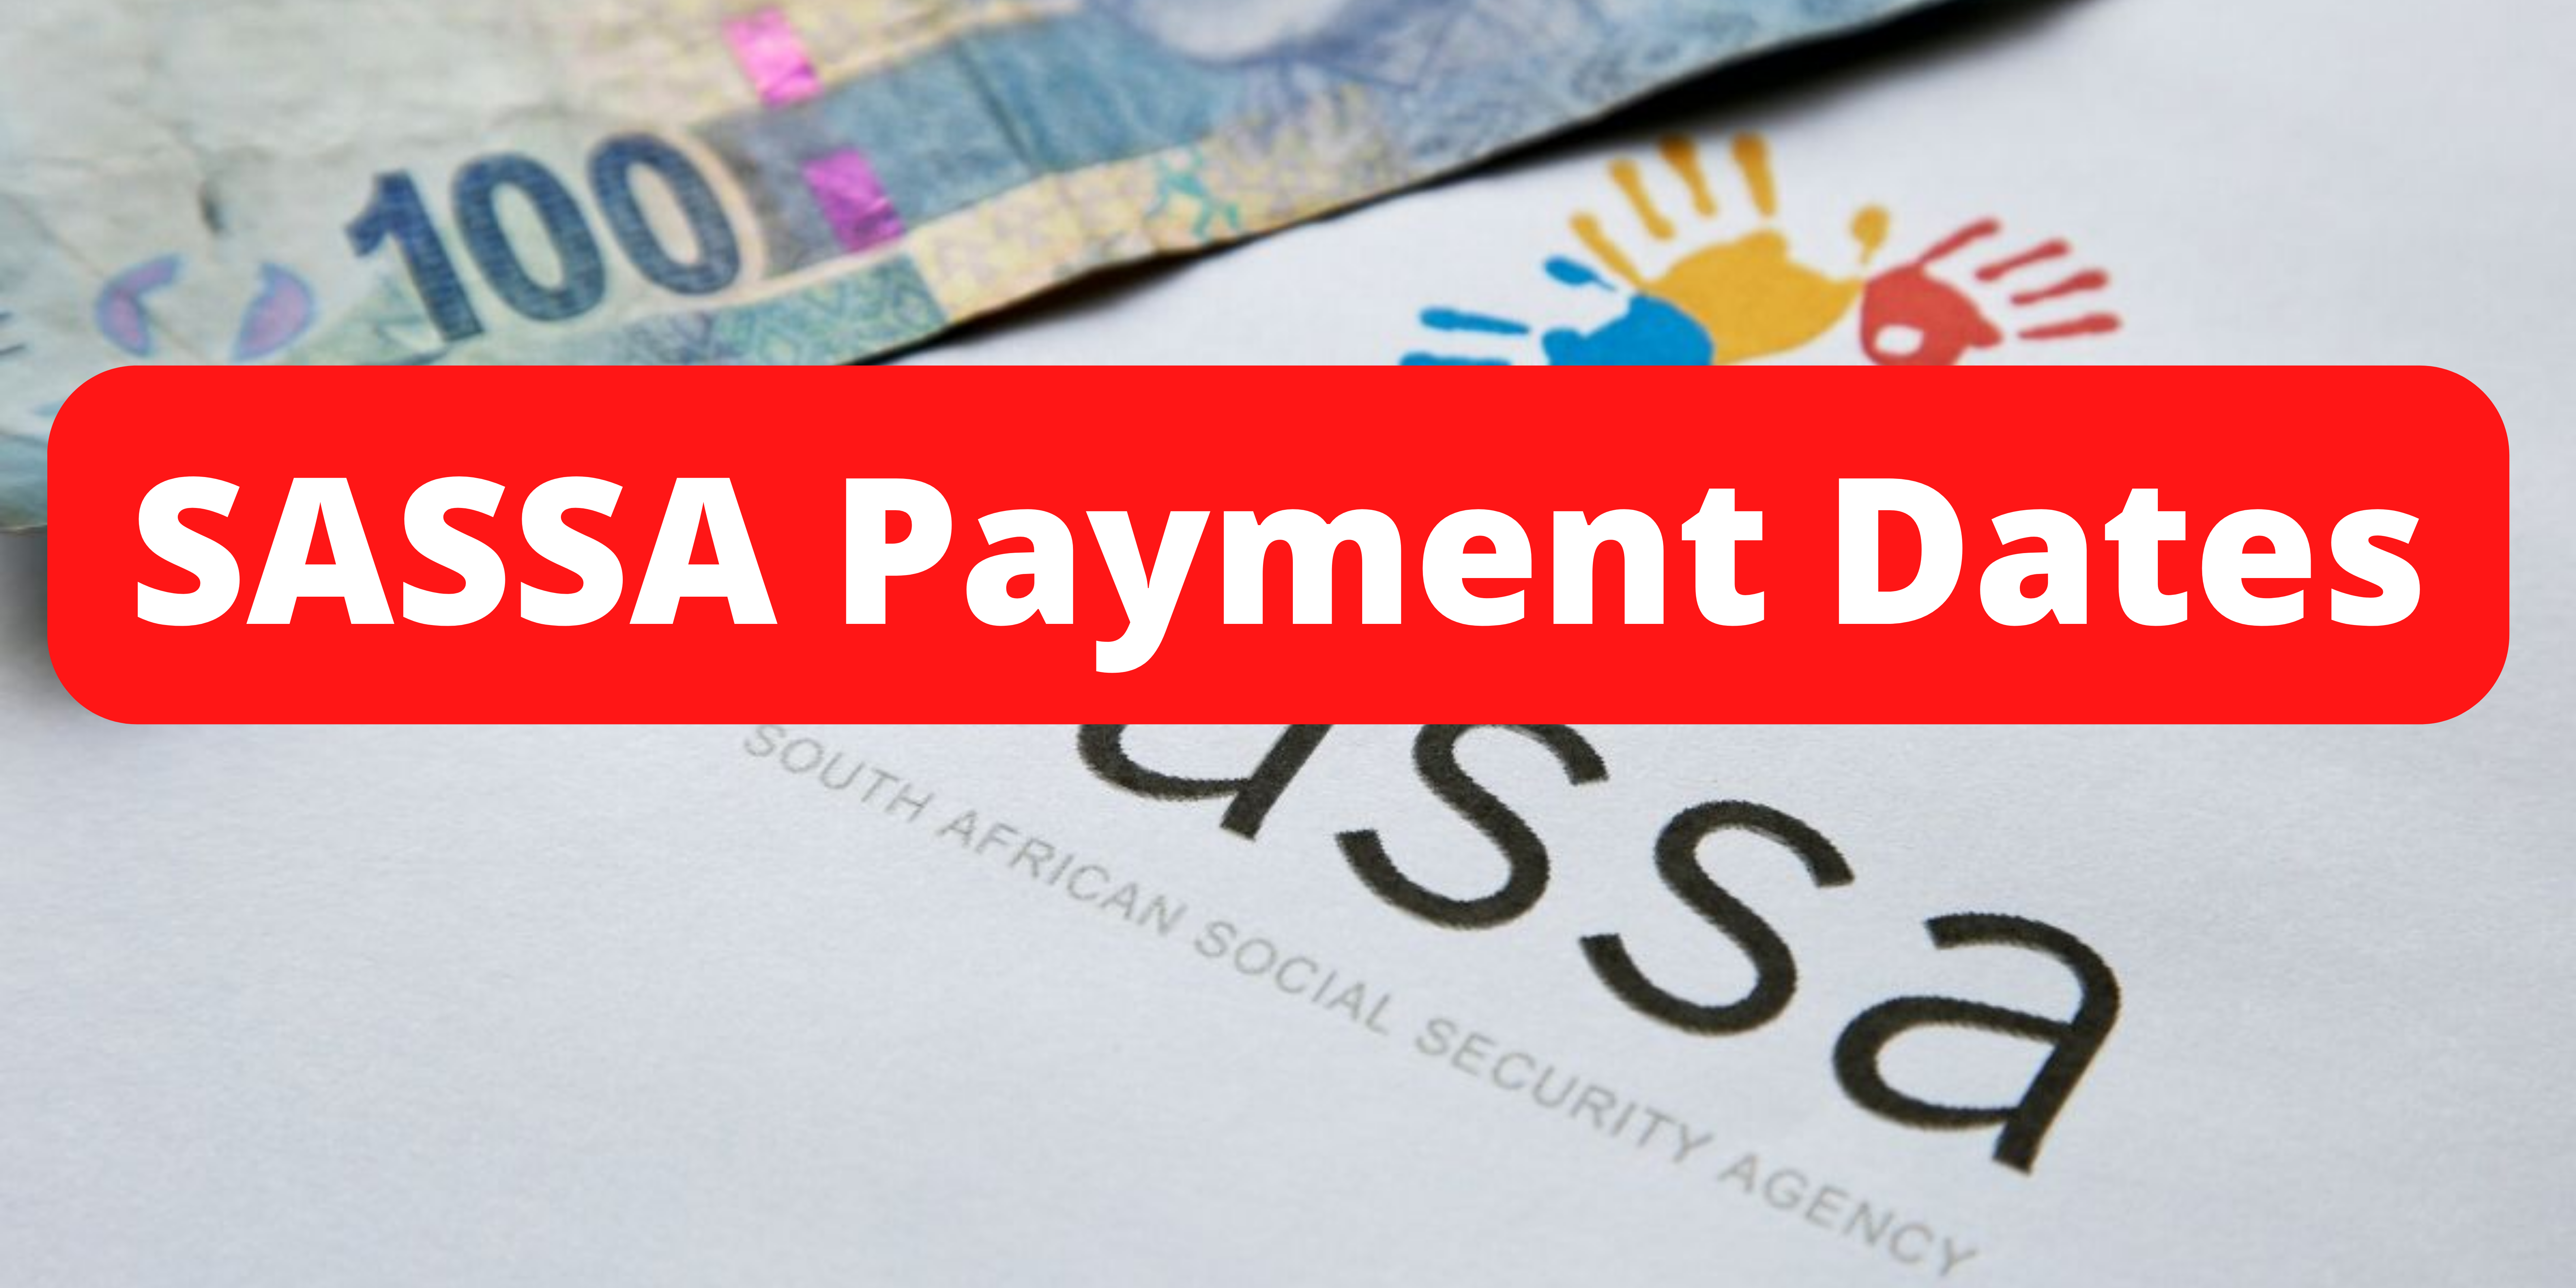 No response on R350 grant? Sassa will process new applications only after regulations are amended